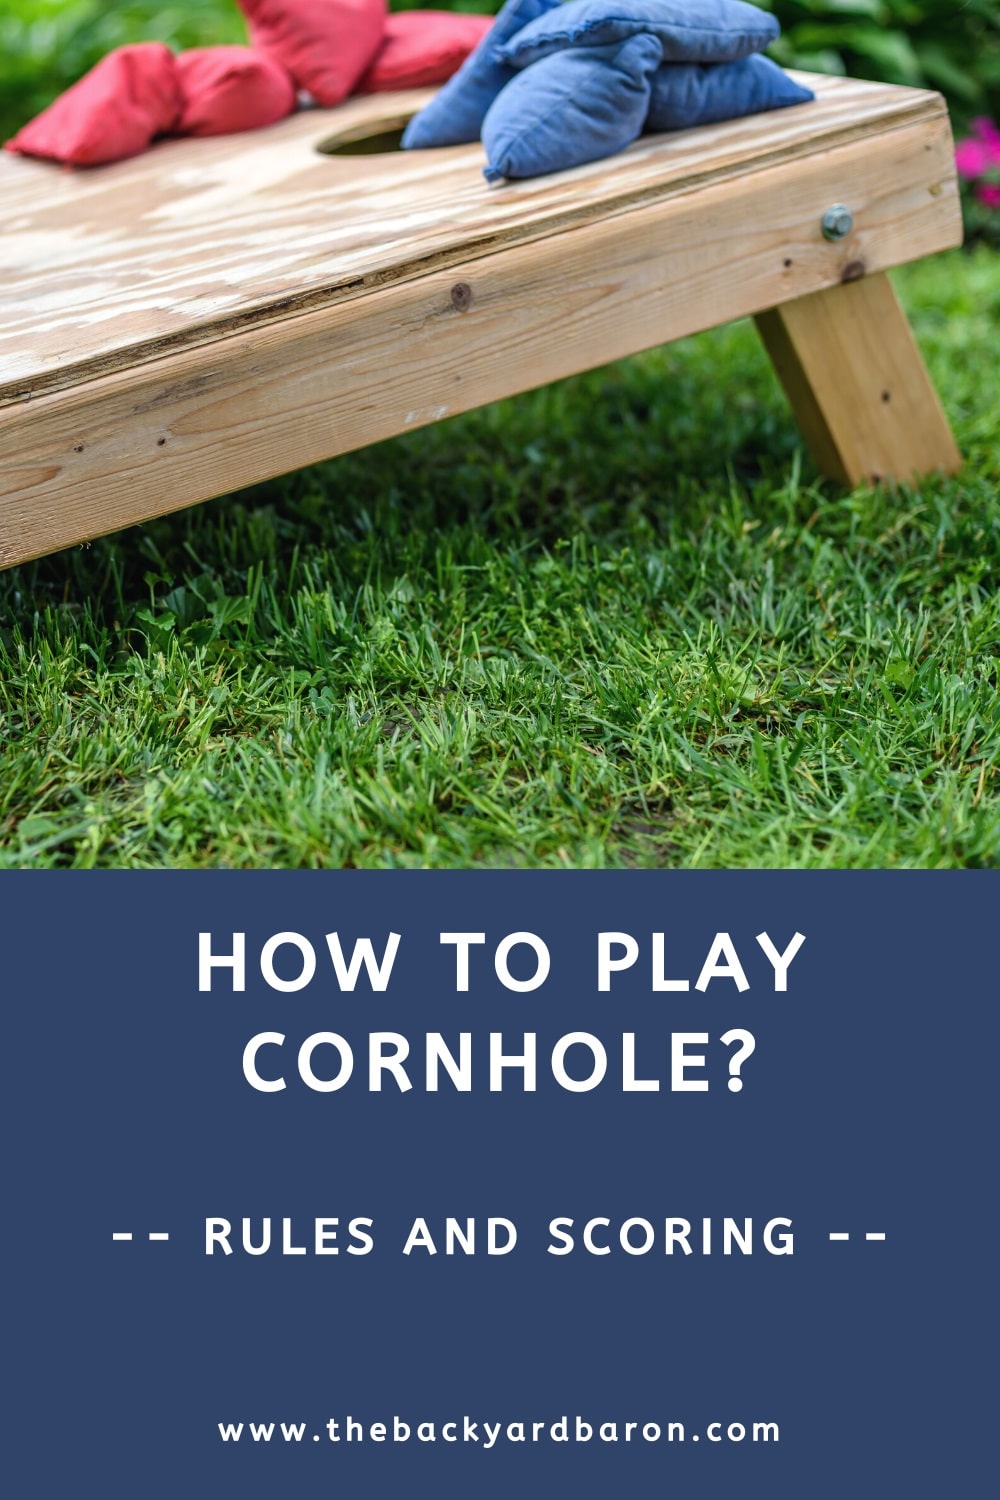 How to play cornhole? (rules and scoring)